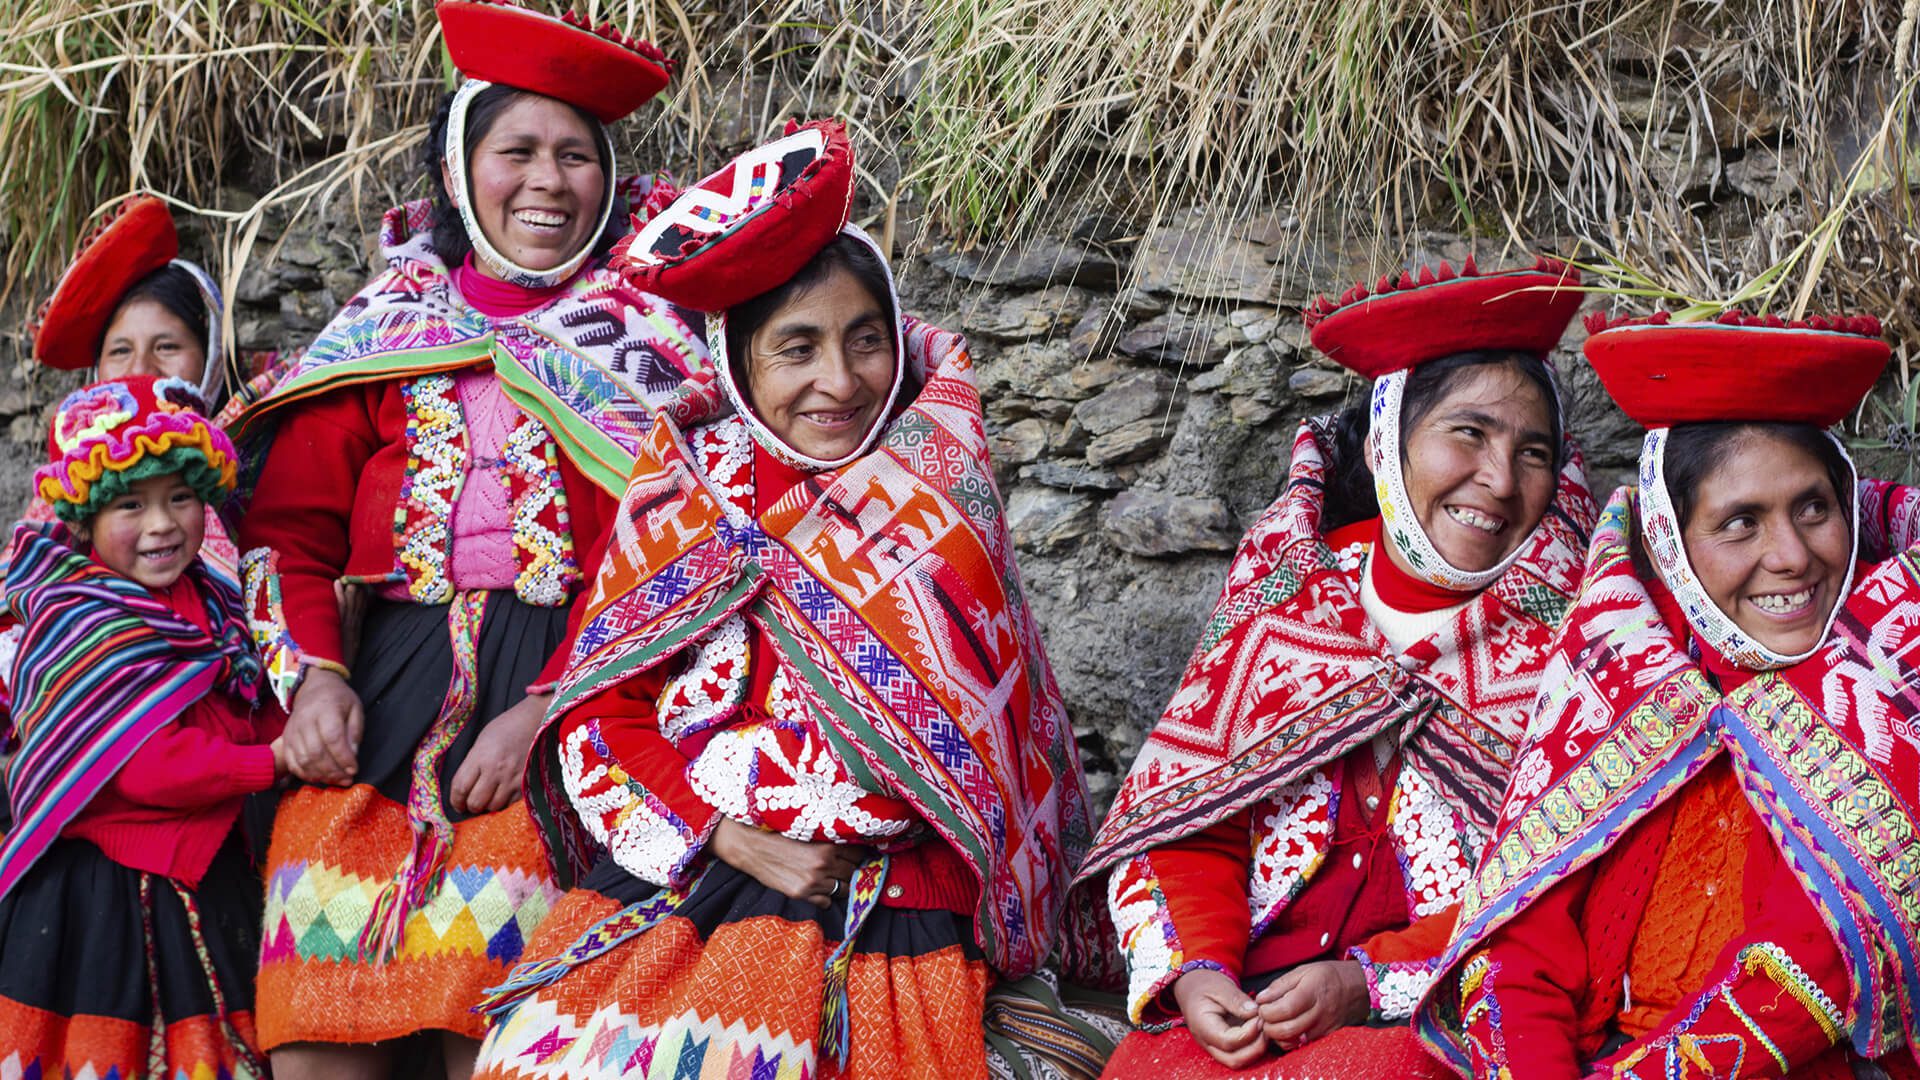 The native Patacancha attire is extremely beautiful; their hats and ponchos are very colorful pieces.